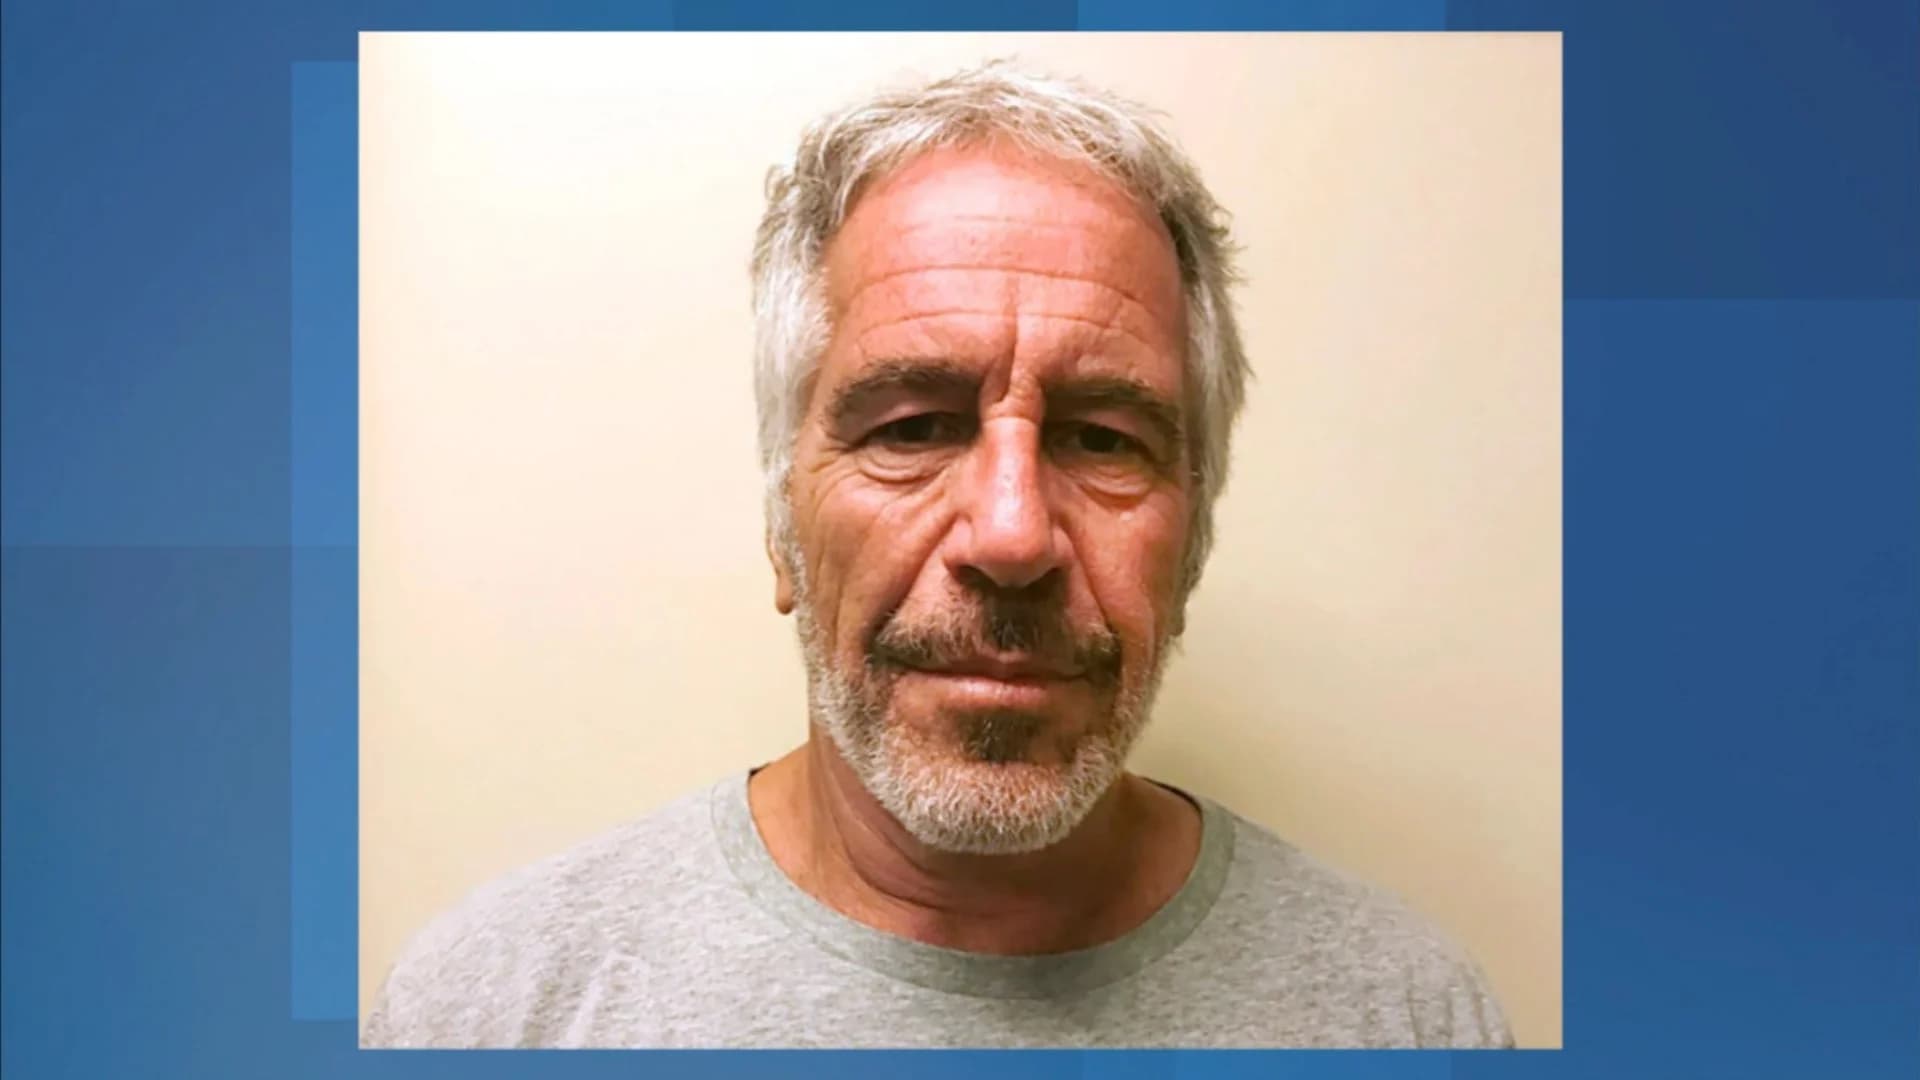 Medical examiner rules Epstein death a suicide by hanging